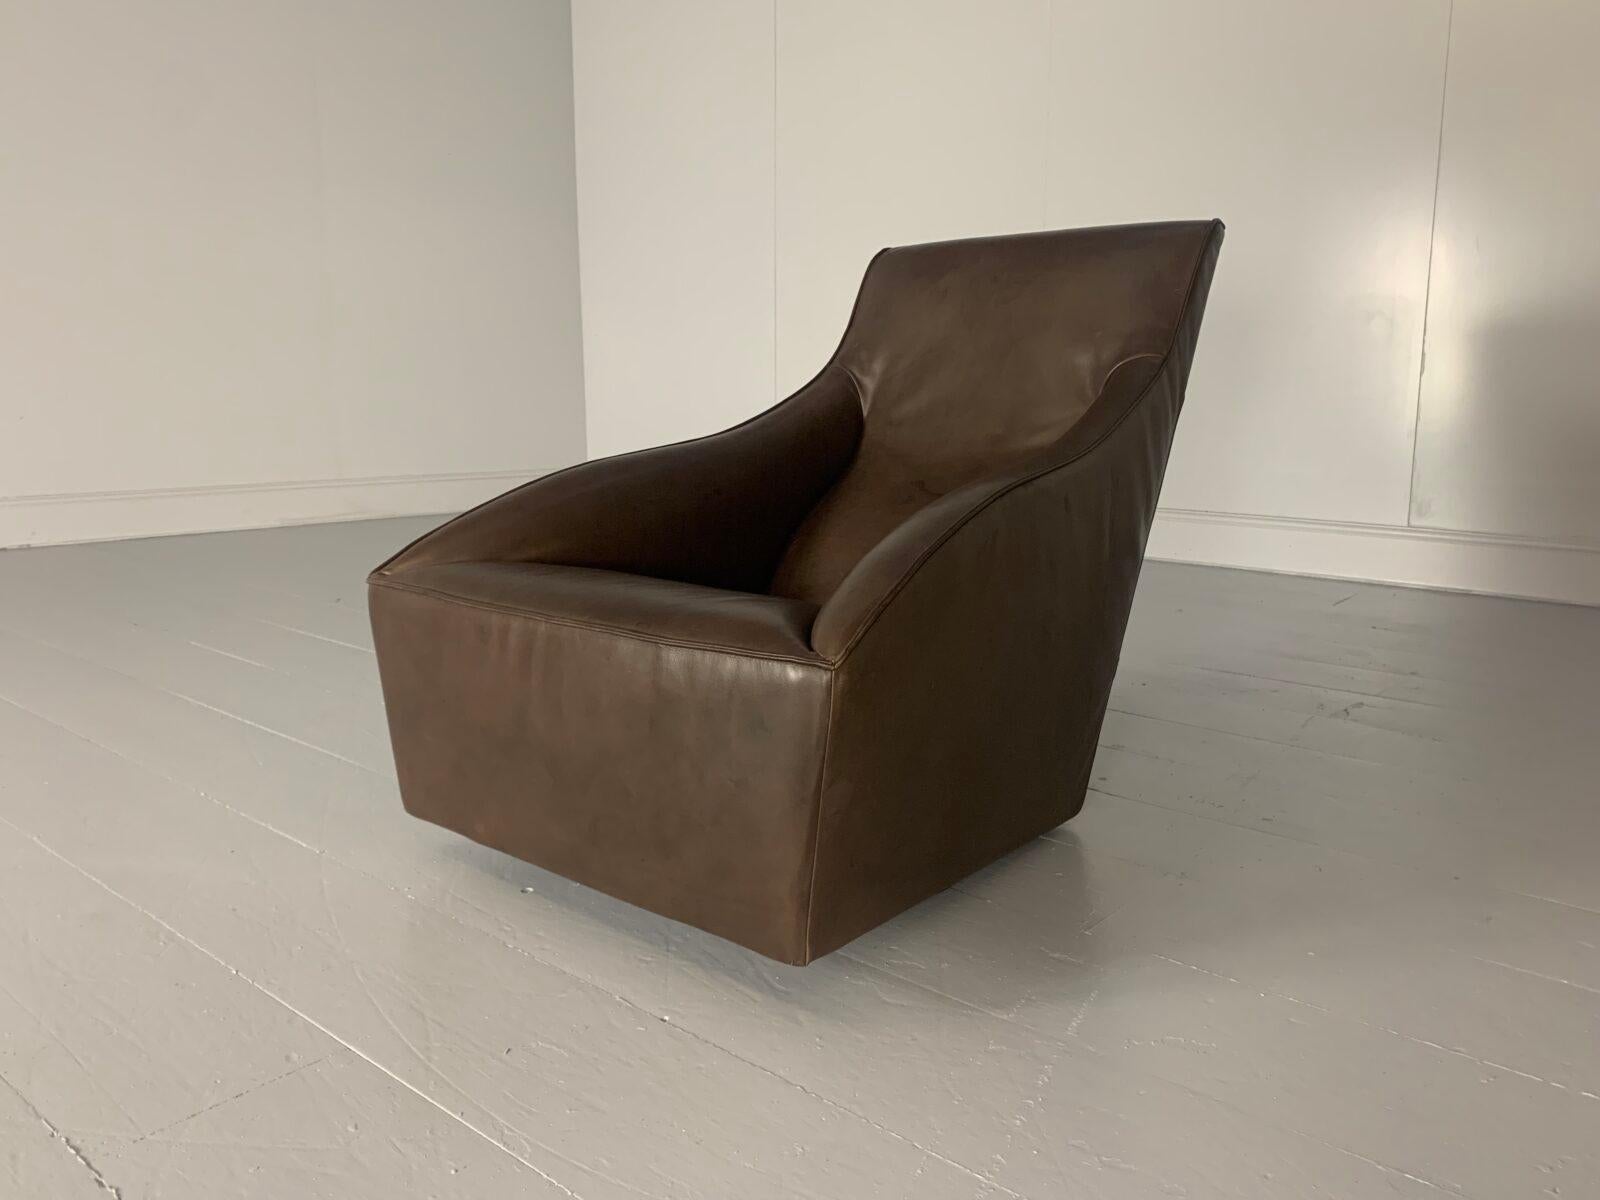 Contemporary Molteni & C “Doda” Armchair - In Pale-Walnut Brown Leather For Sale